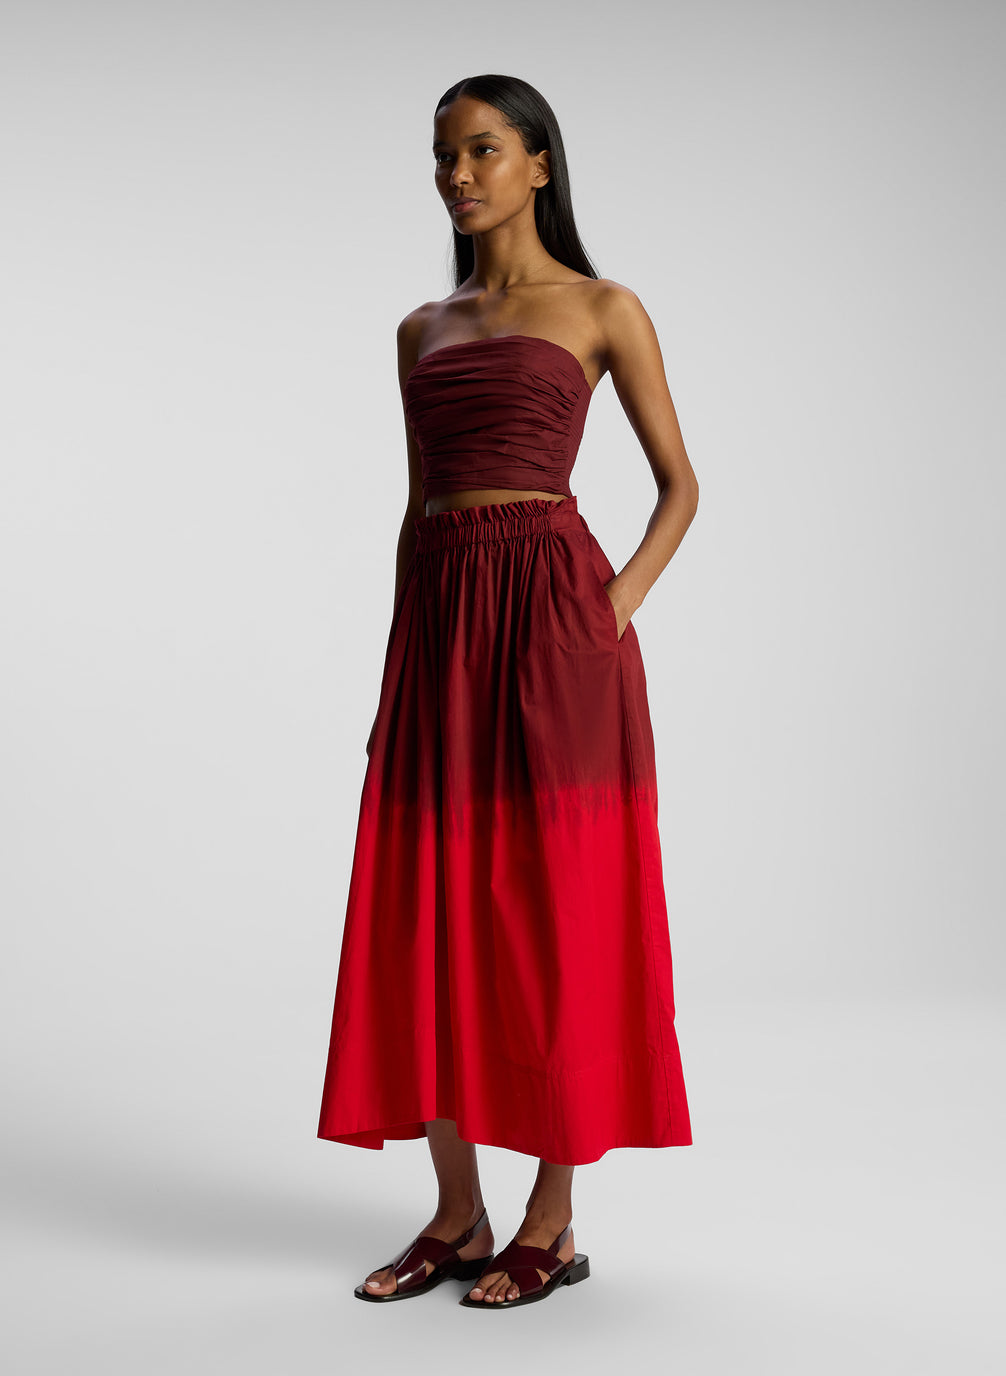 side view of woman wearing burgundy and red ombre top and skirt